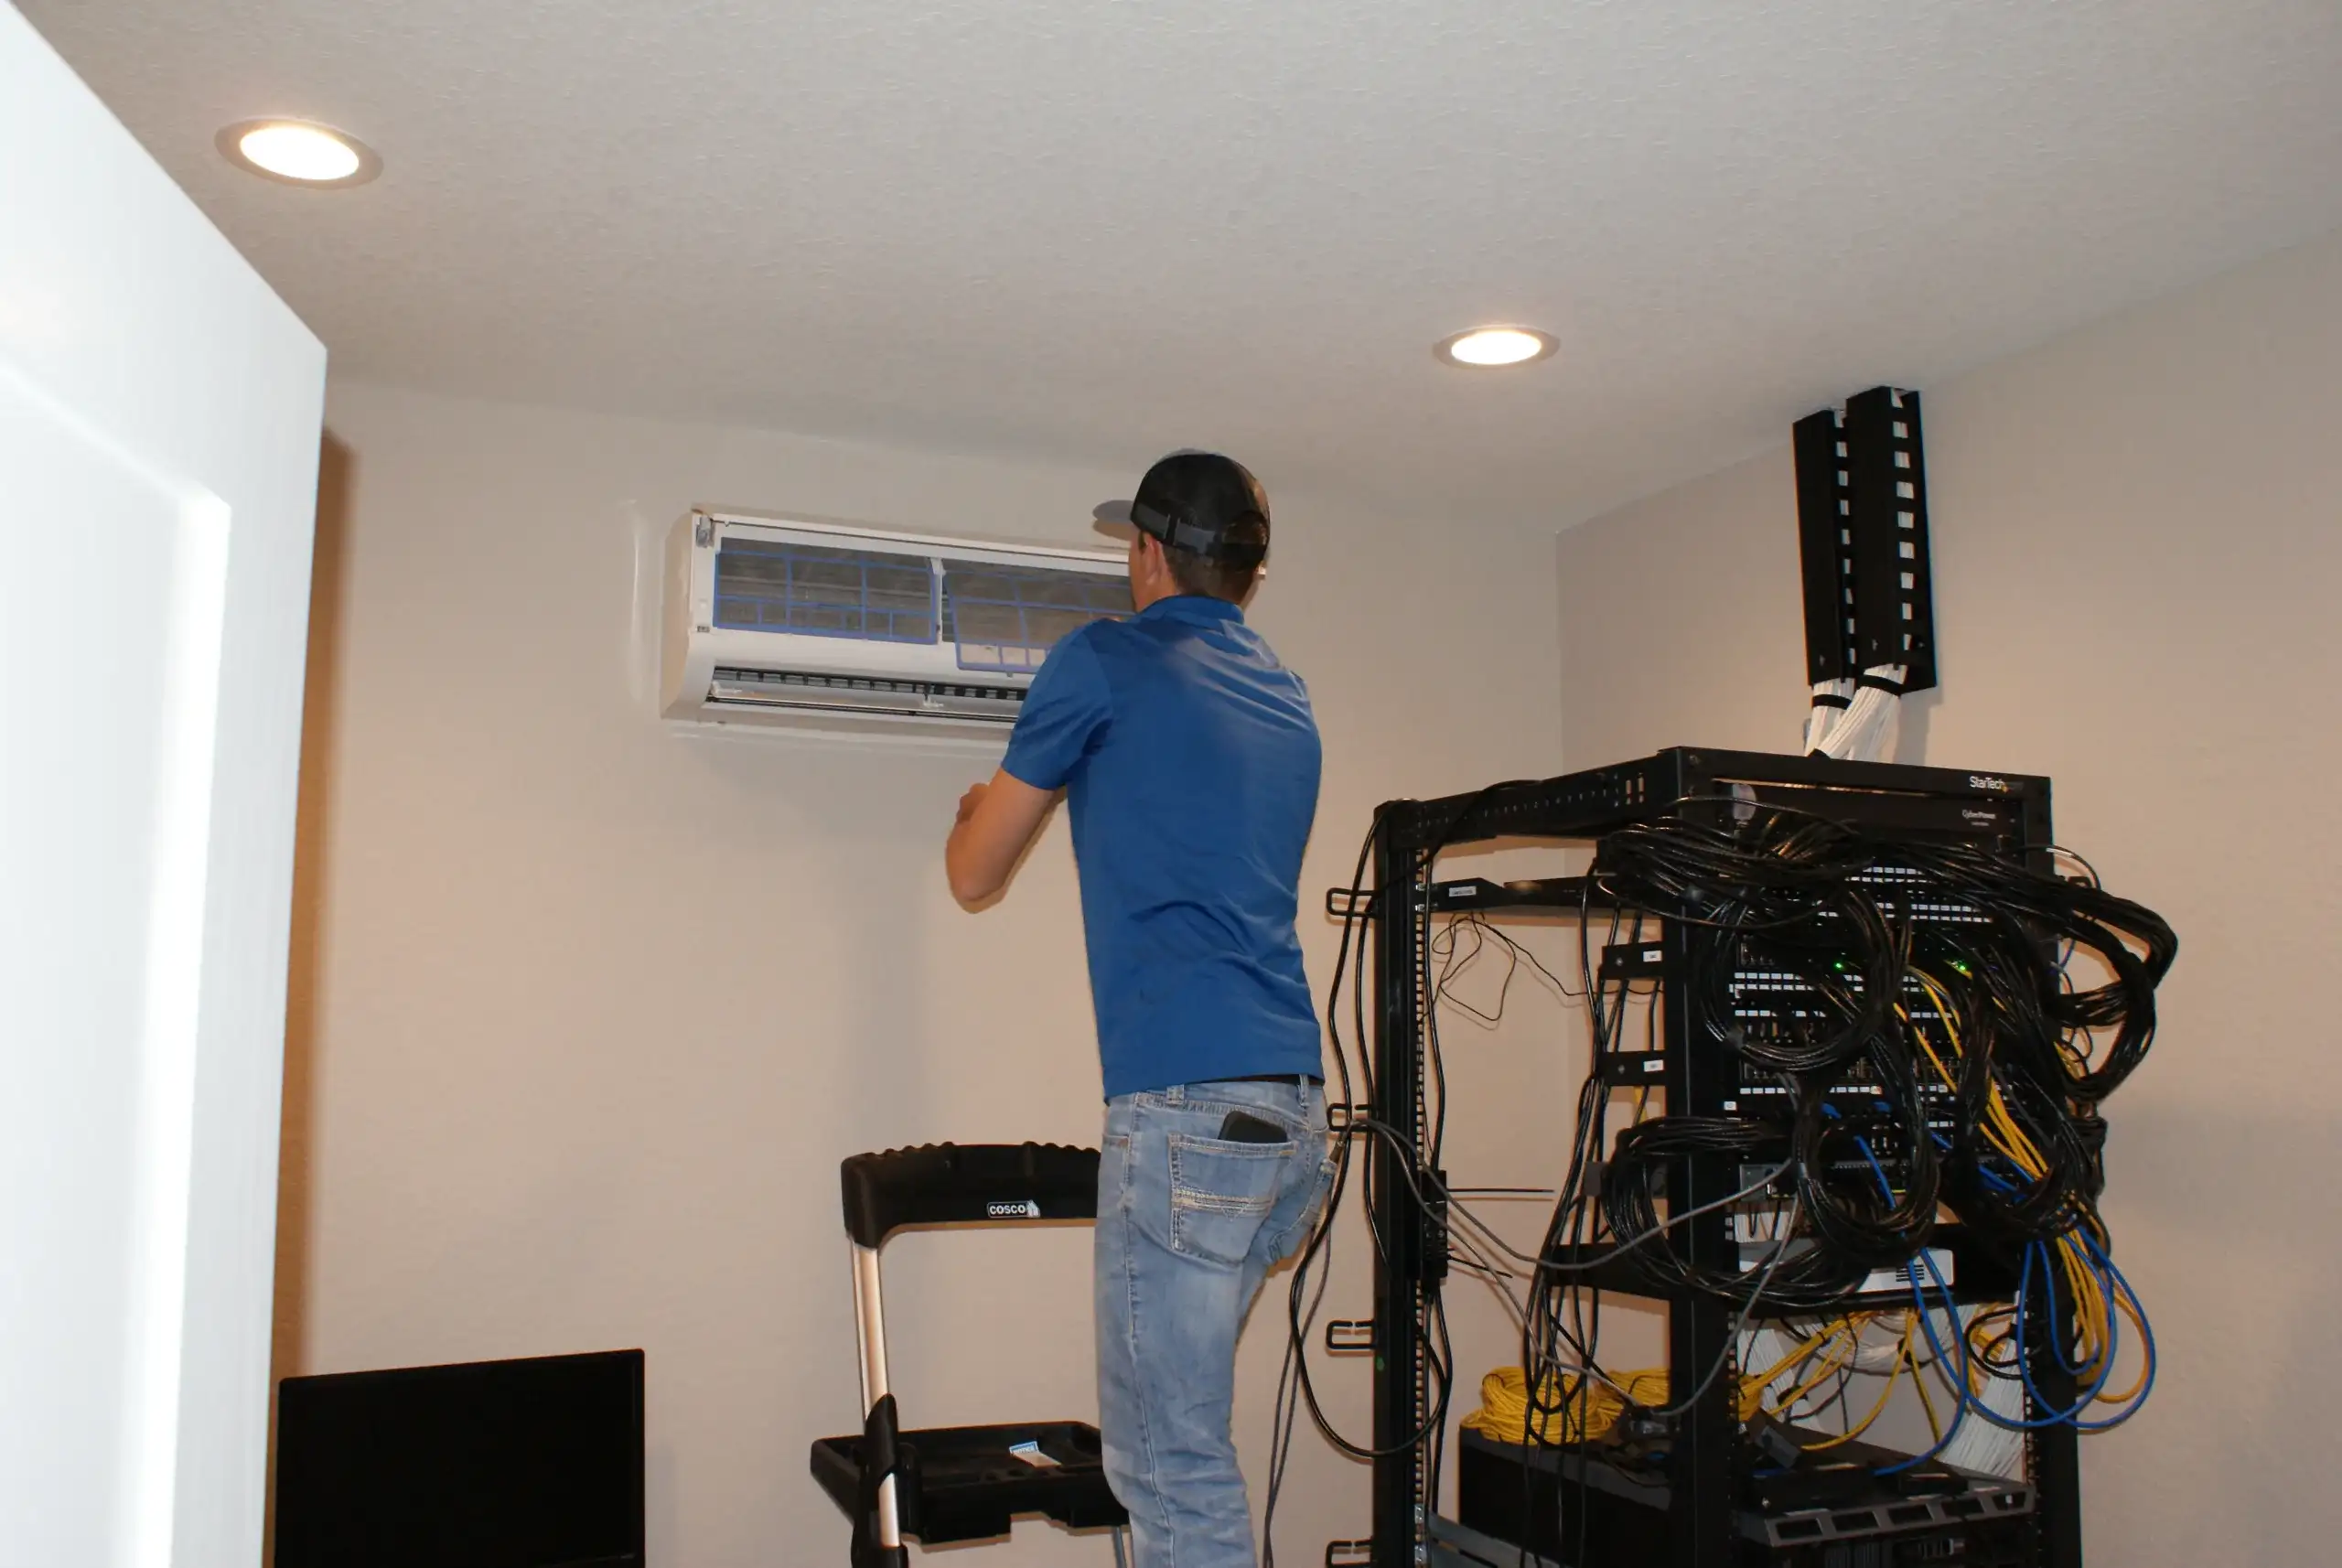 Office HVAC technician in a blue polo shirt and cap is standing on a step stool while working